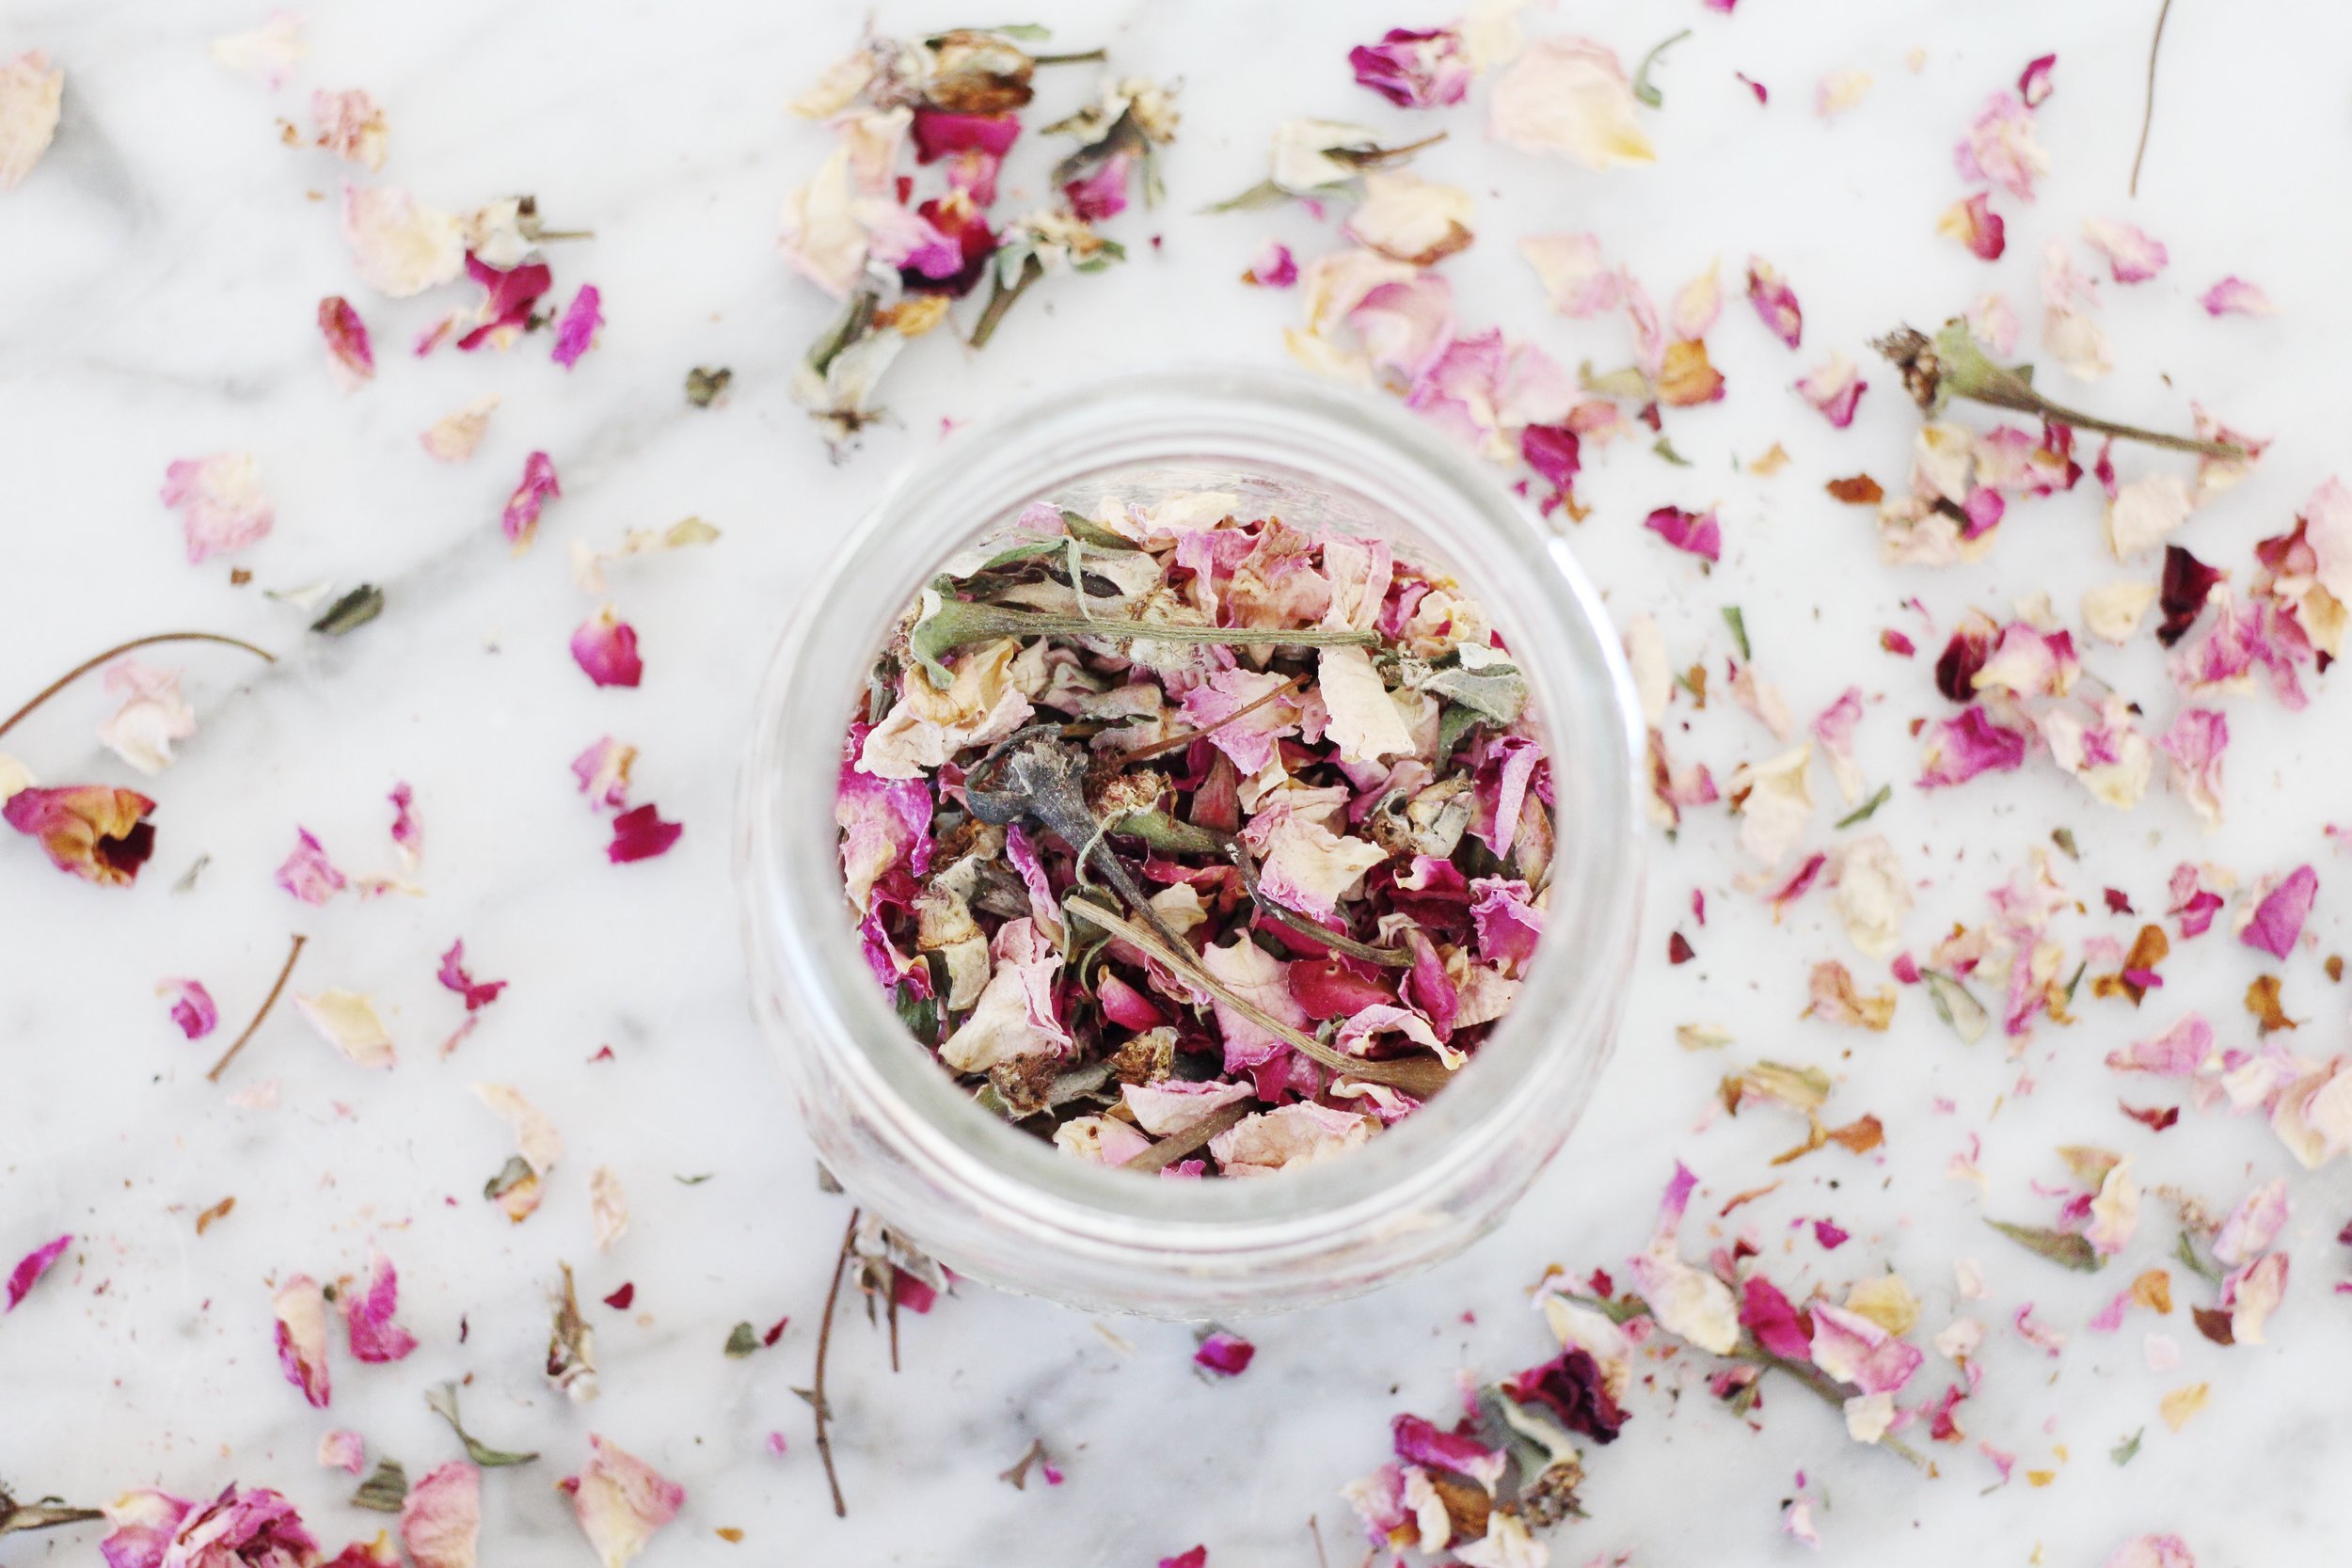 Infusing Oil With Rose Scent - How To Make A Homemade Rose Oil Infusion